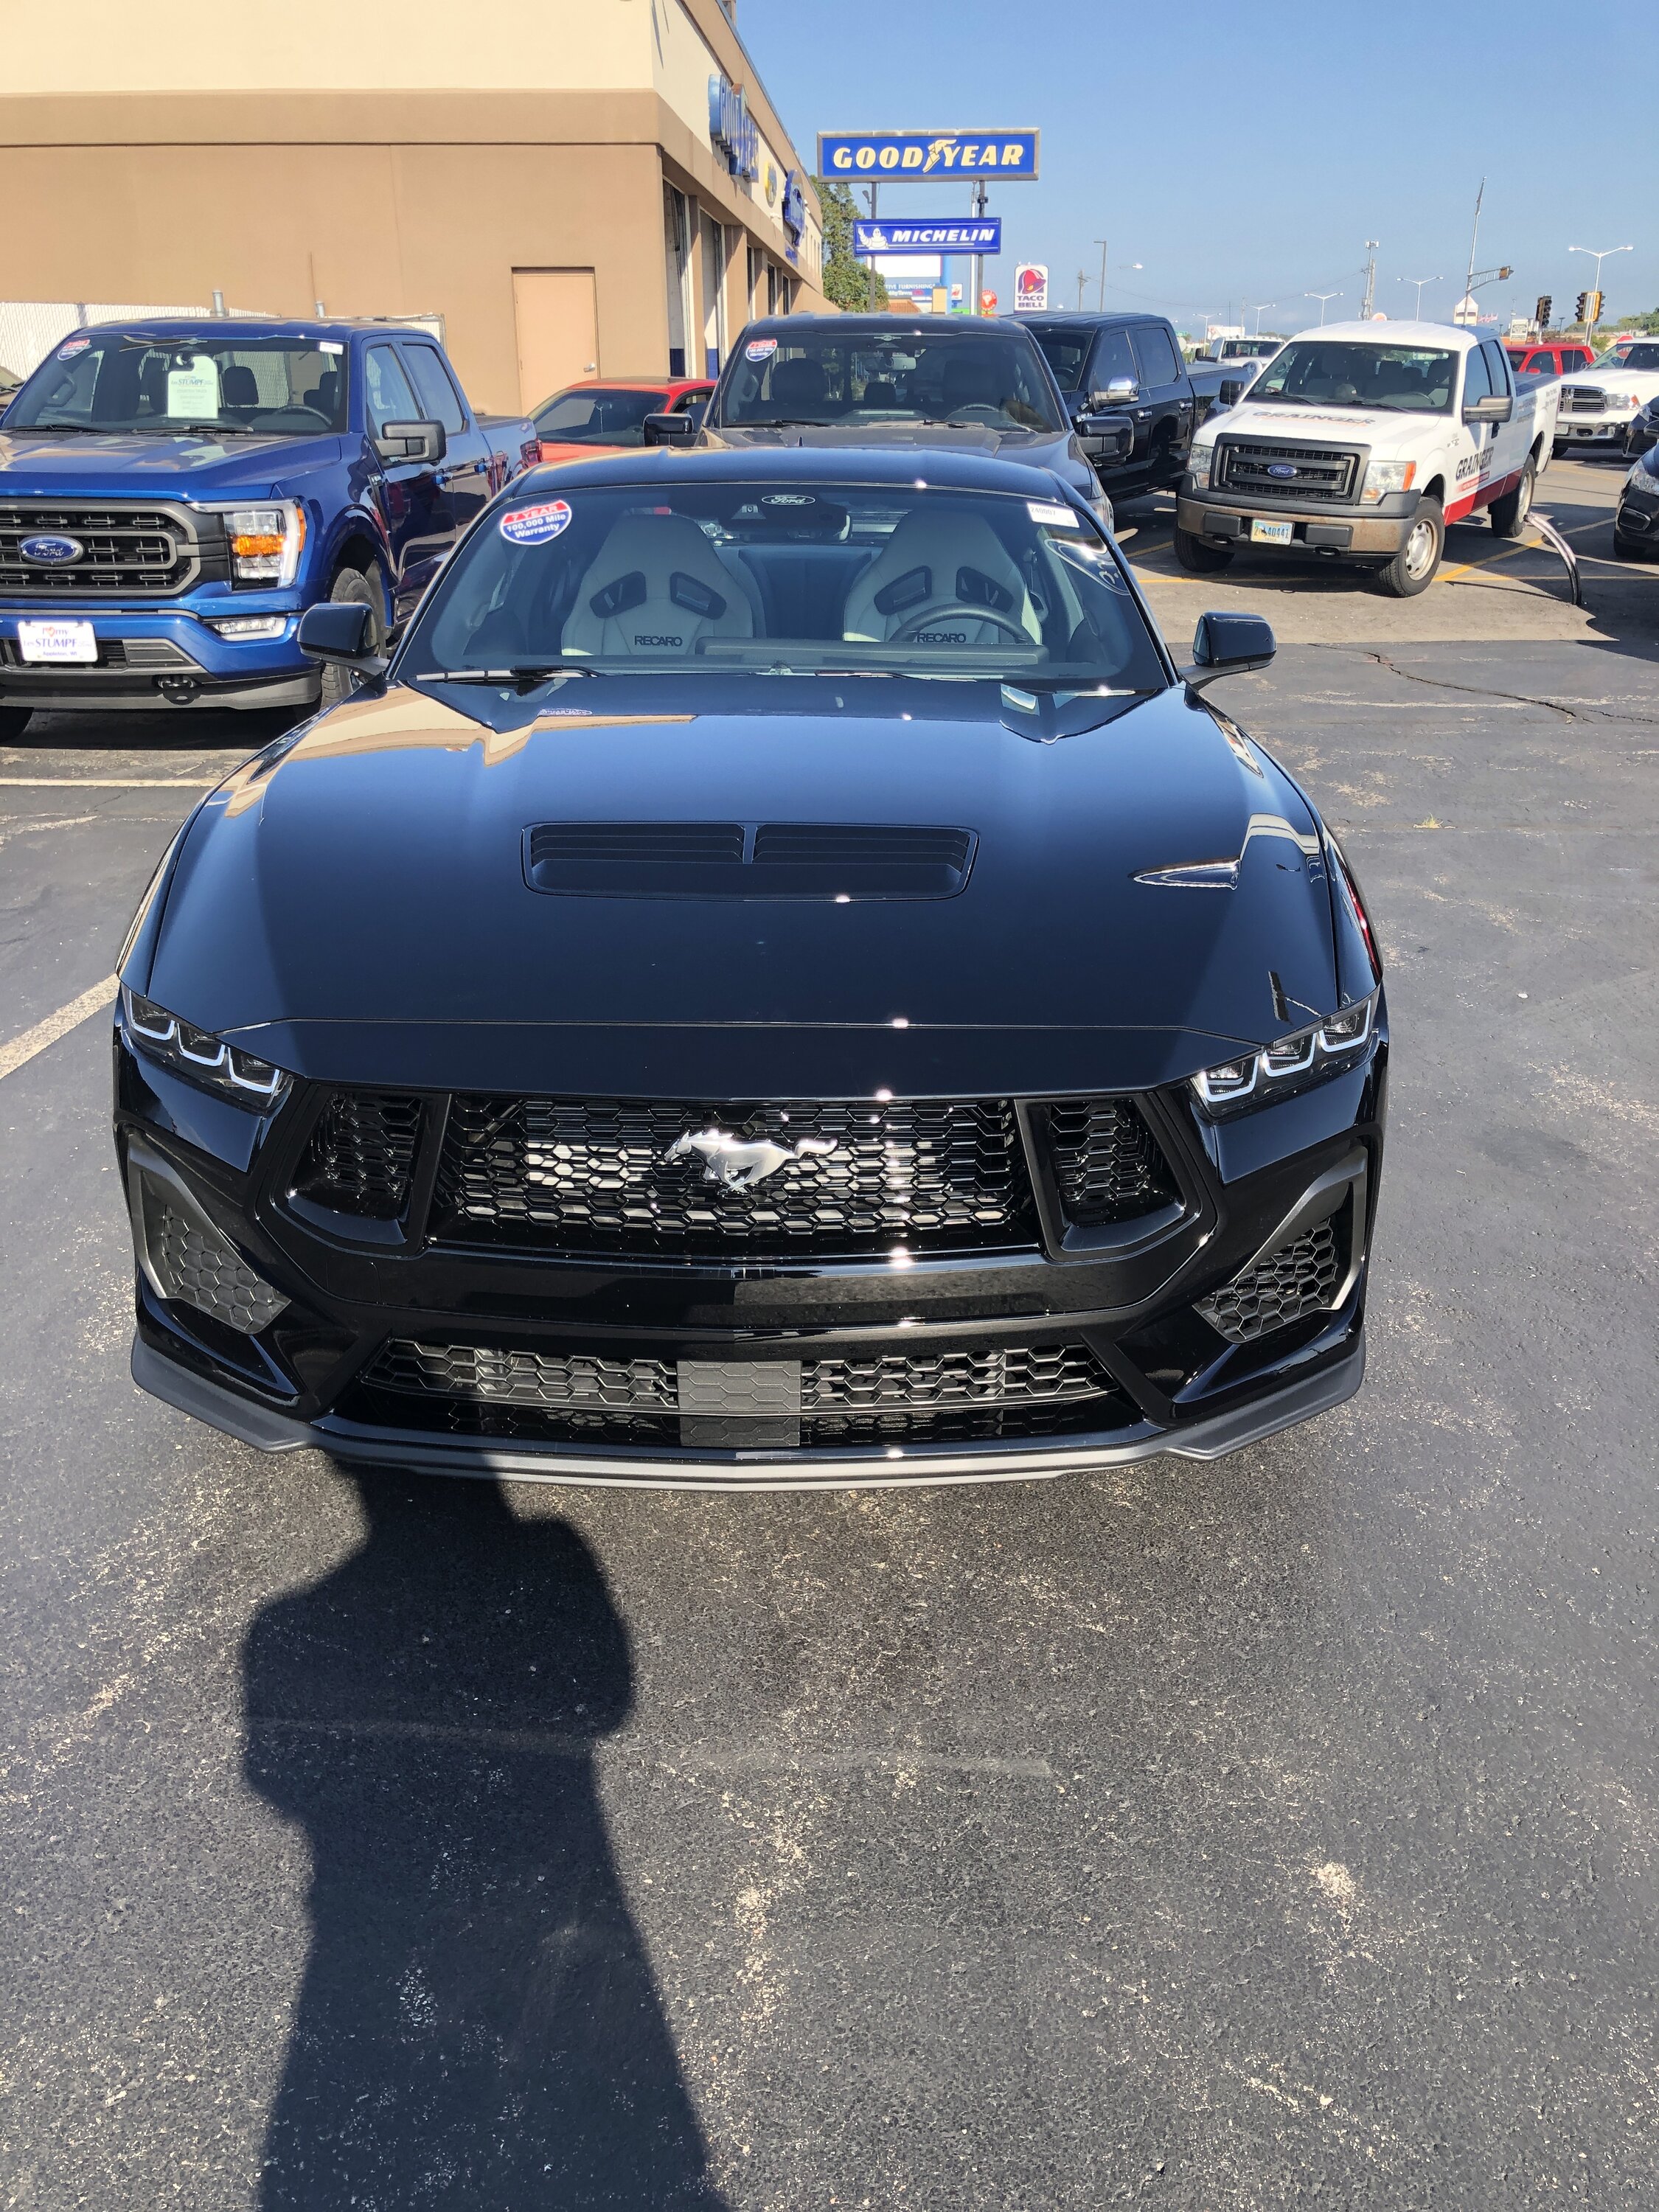 S650 Mustang First Impressions of the S650 Mustang 20230825_214730749_iOS